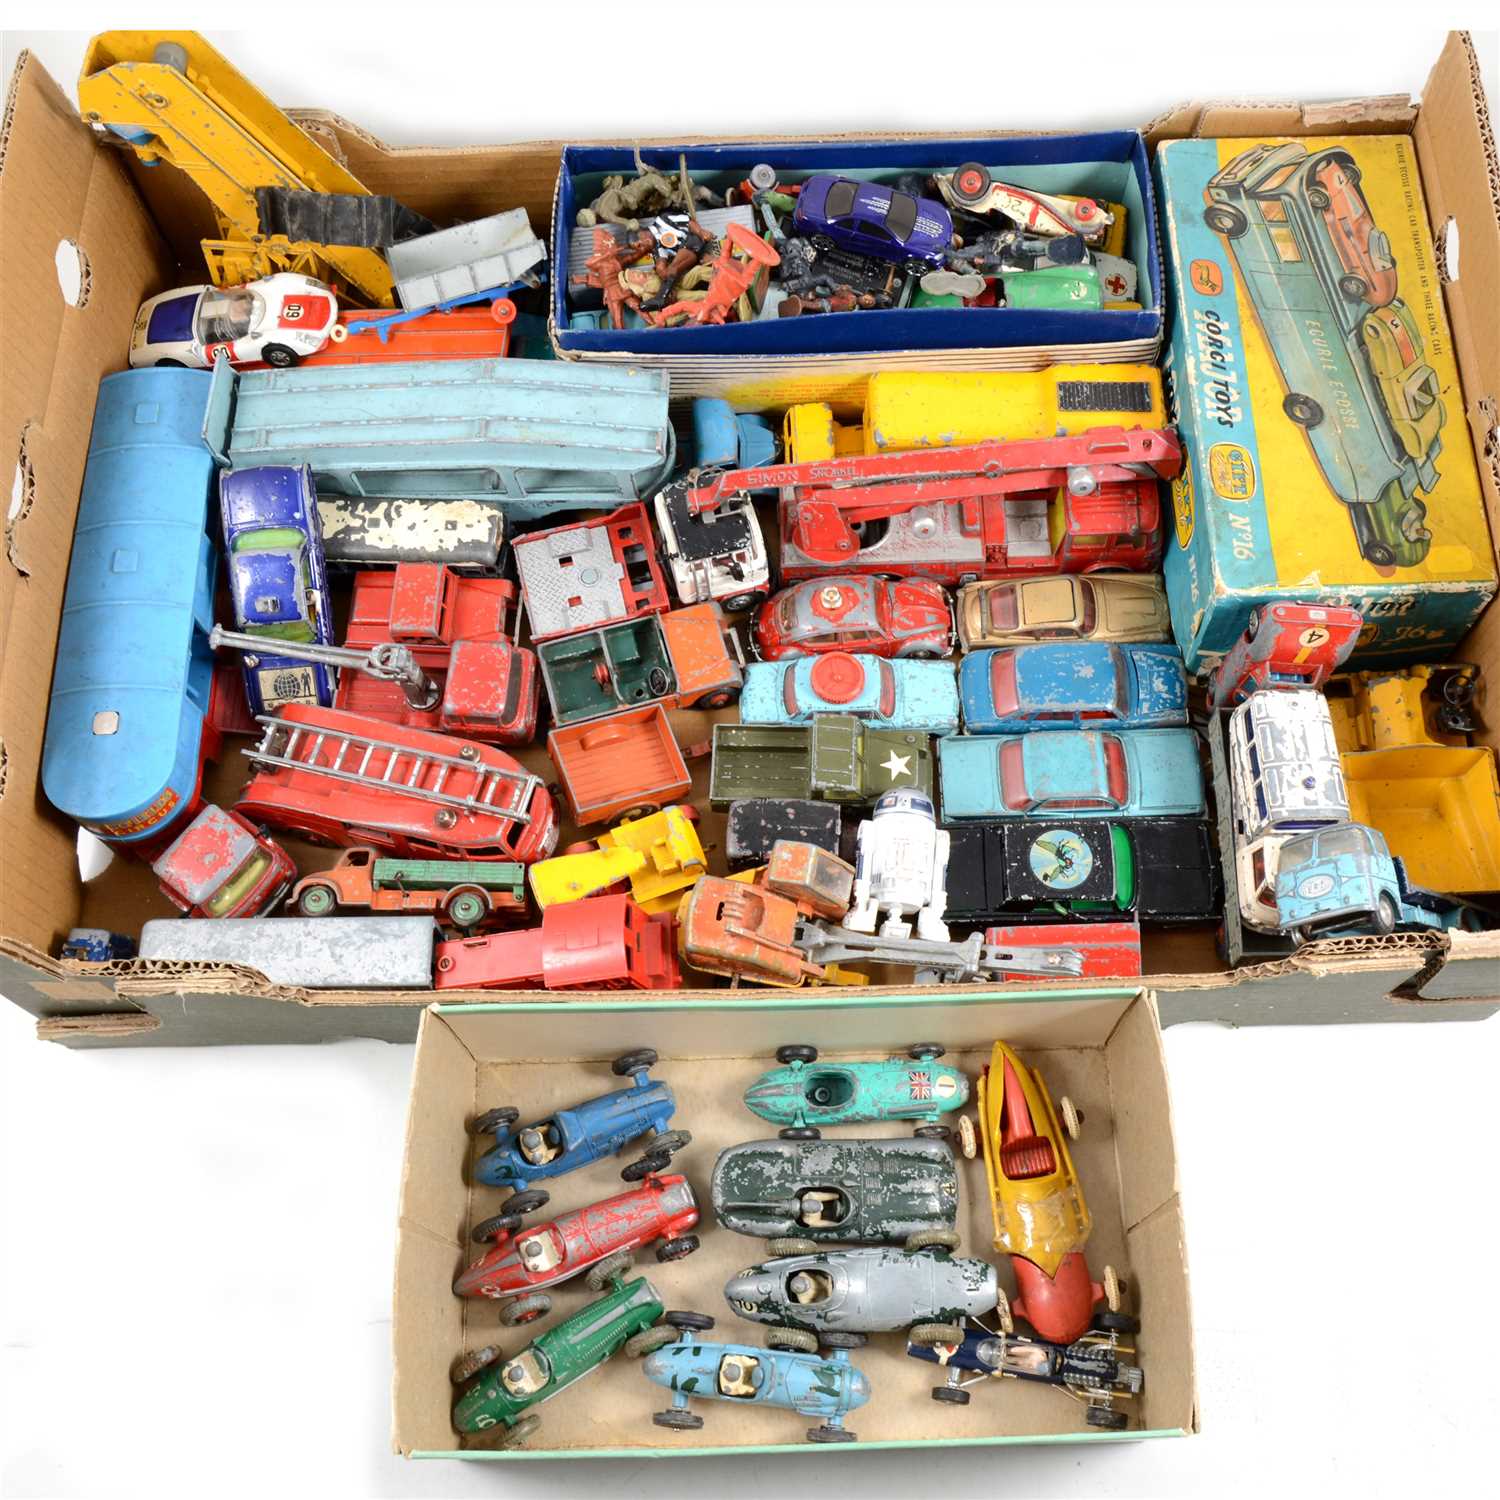 Lot 151 - Die-cast model cars and vehicles, by Dinky, Corgi, Crescent, Matchbox and others, one box